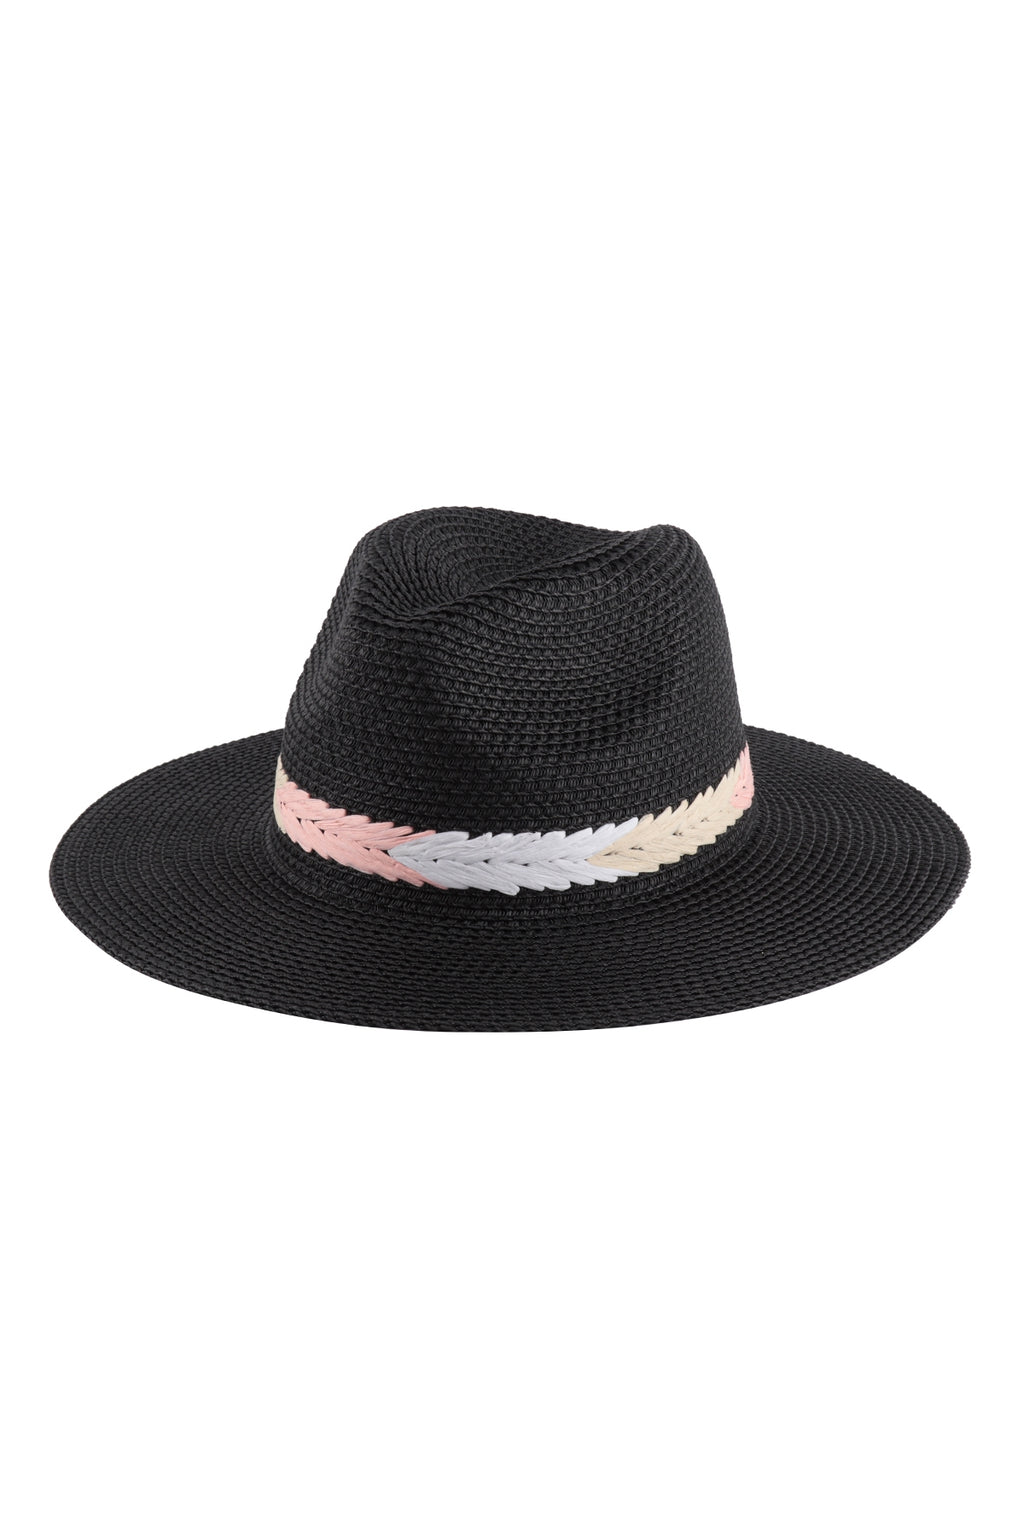 Panama Brim Summer Hat with Braided Stripe Accent Black - Pack of 6